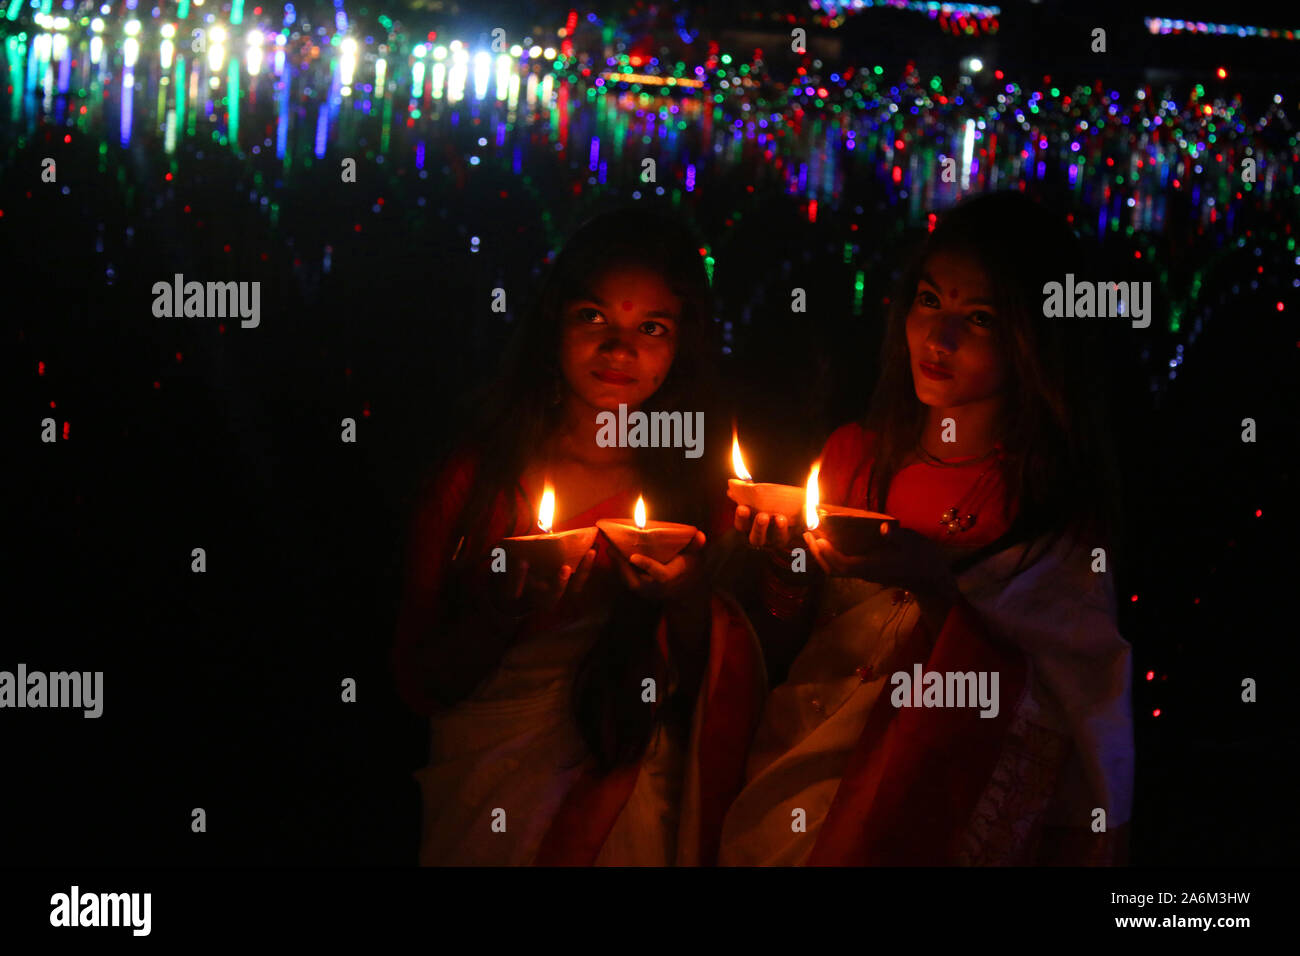 Two Bangladeshi Young Girl Hold Oil Lamps As They Poses For A Photo During The Diwali Festival At A Temple In Dhaka The Diwali Festival Of Lights Symbolizes The Victory Of Good Over